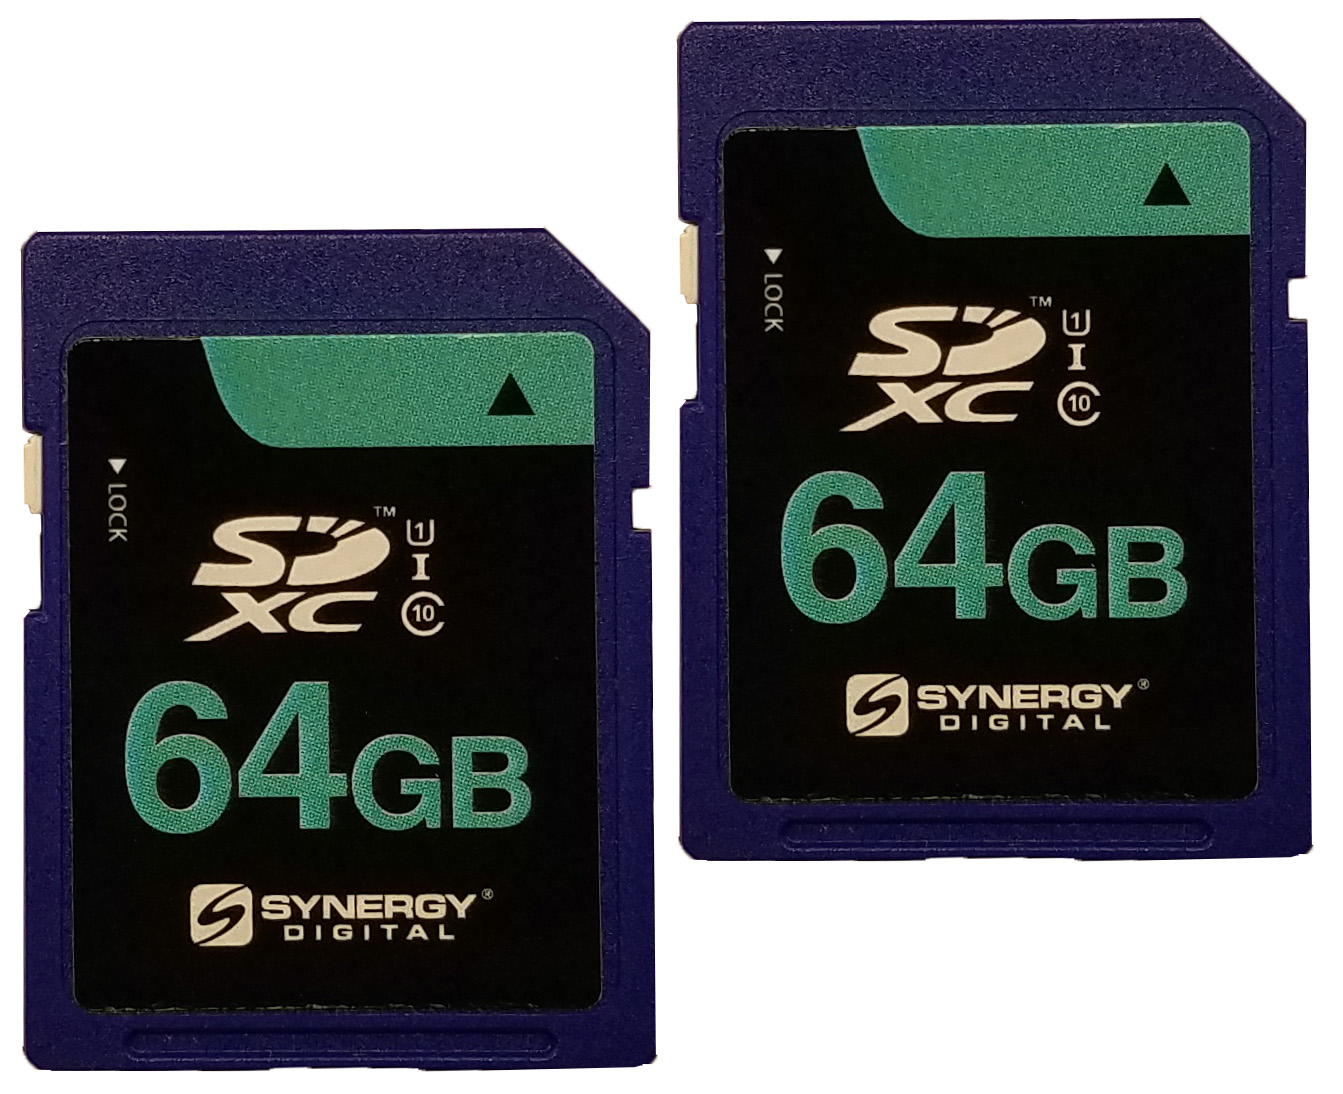 2x 64GB Secure Digital Class 10 Extreme Capacity (SDXC) Memory Card (2 Pack)